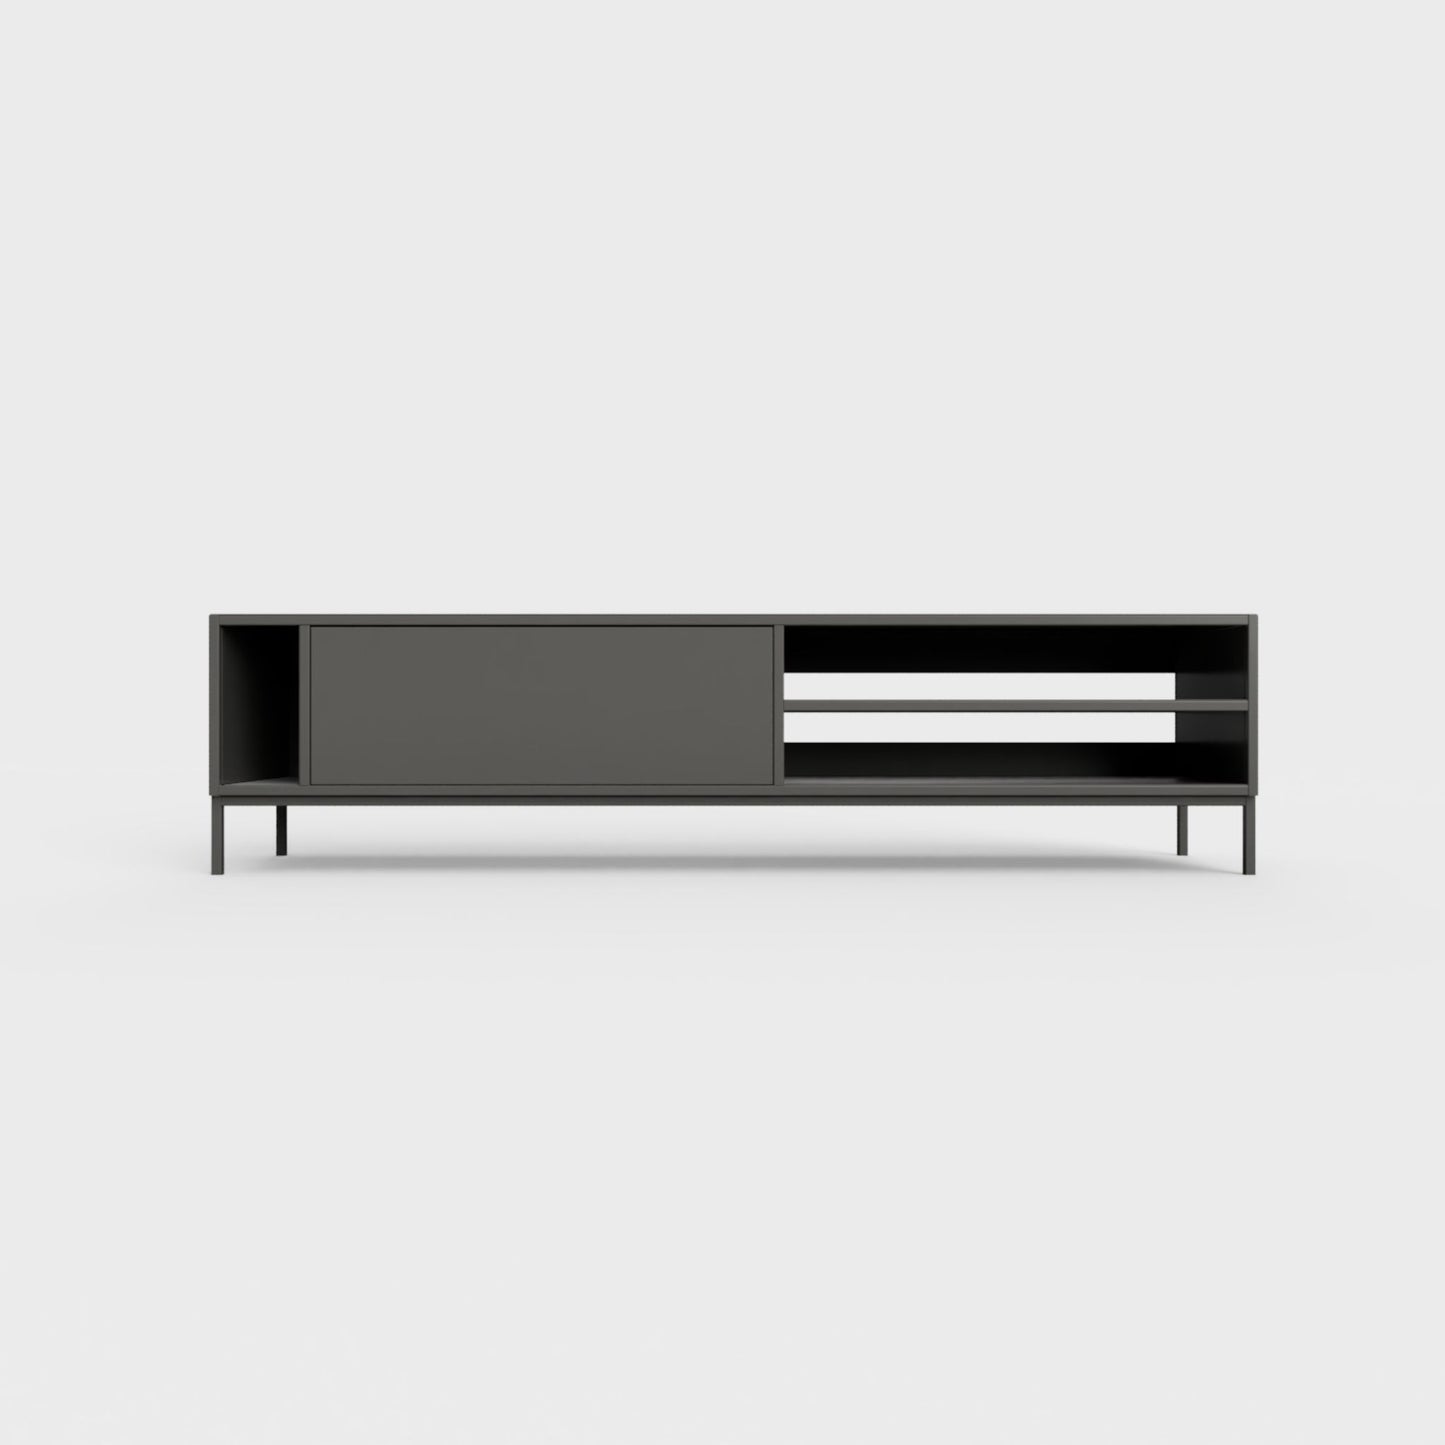 Prunus 03 Lowboard in anthracite gray, powder-coated steel, elegant and modern piece of furniture for your living room